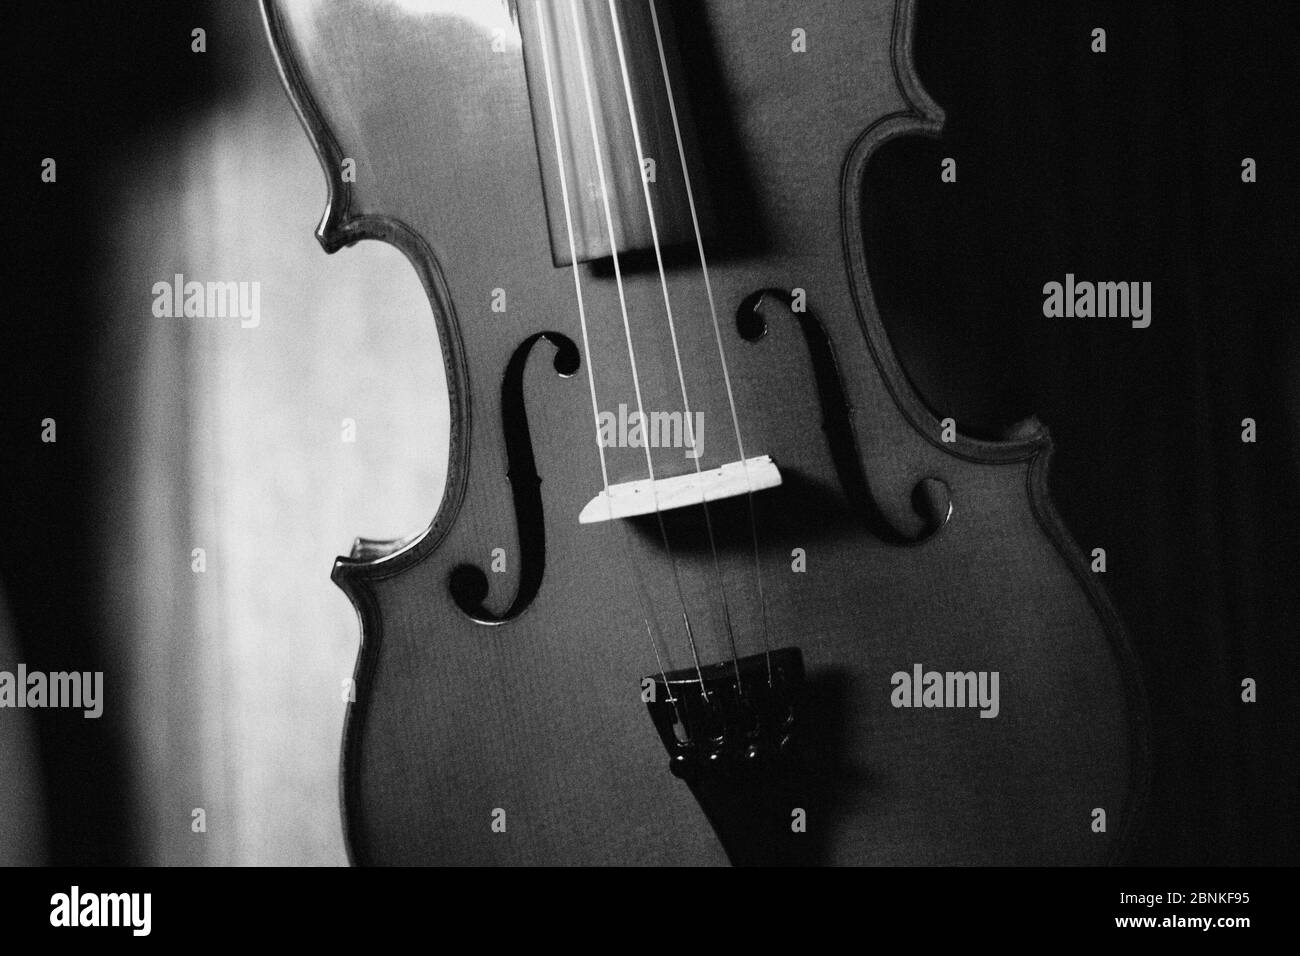 Musical instrument fiddle 4 strings full size blank and white style Stock Photo